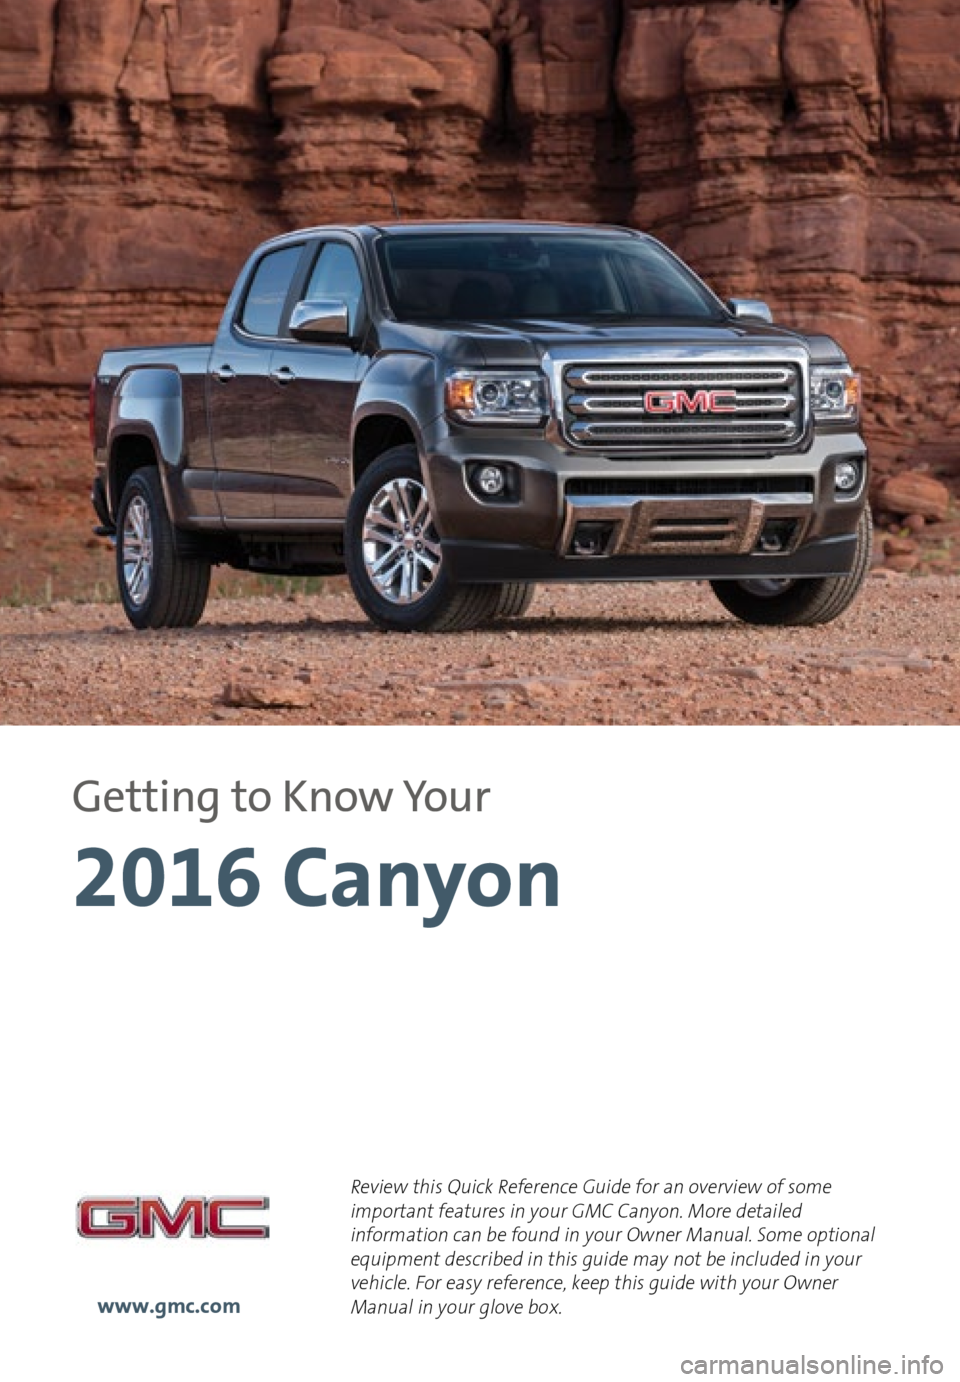 GMC CANYON 2016  Get To Know Guide 